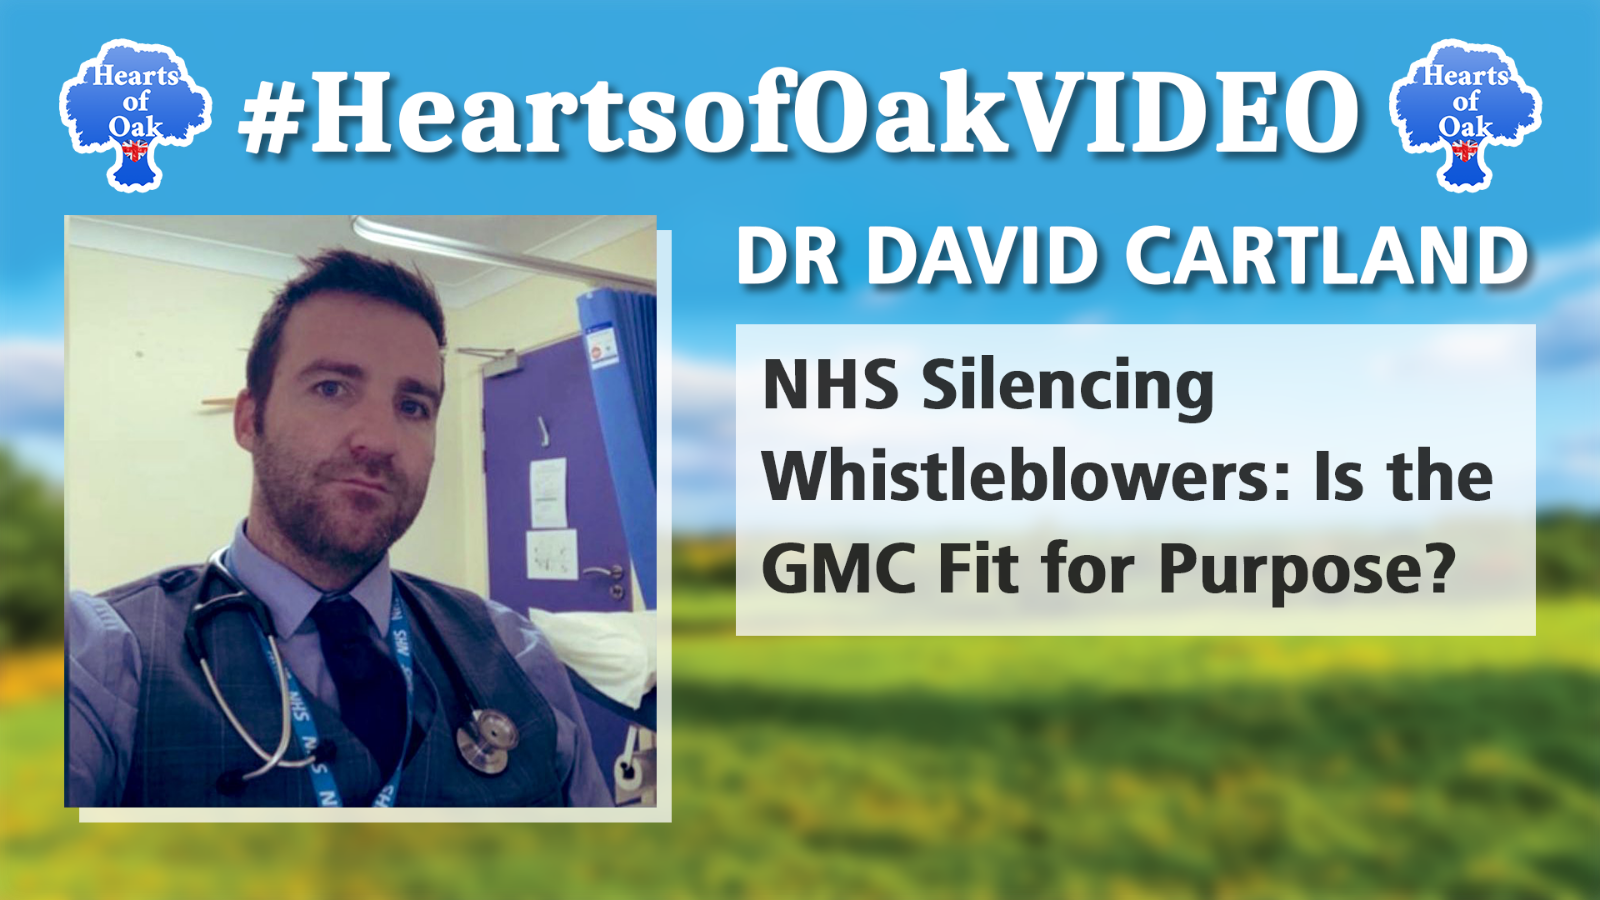 Dr David Cartland - NHS Silencing Whistleblowers: Is the GMC Fit for Purpose?